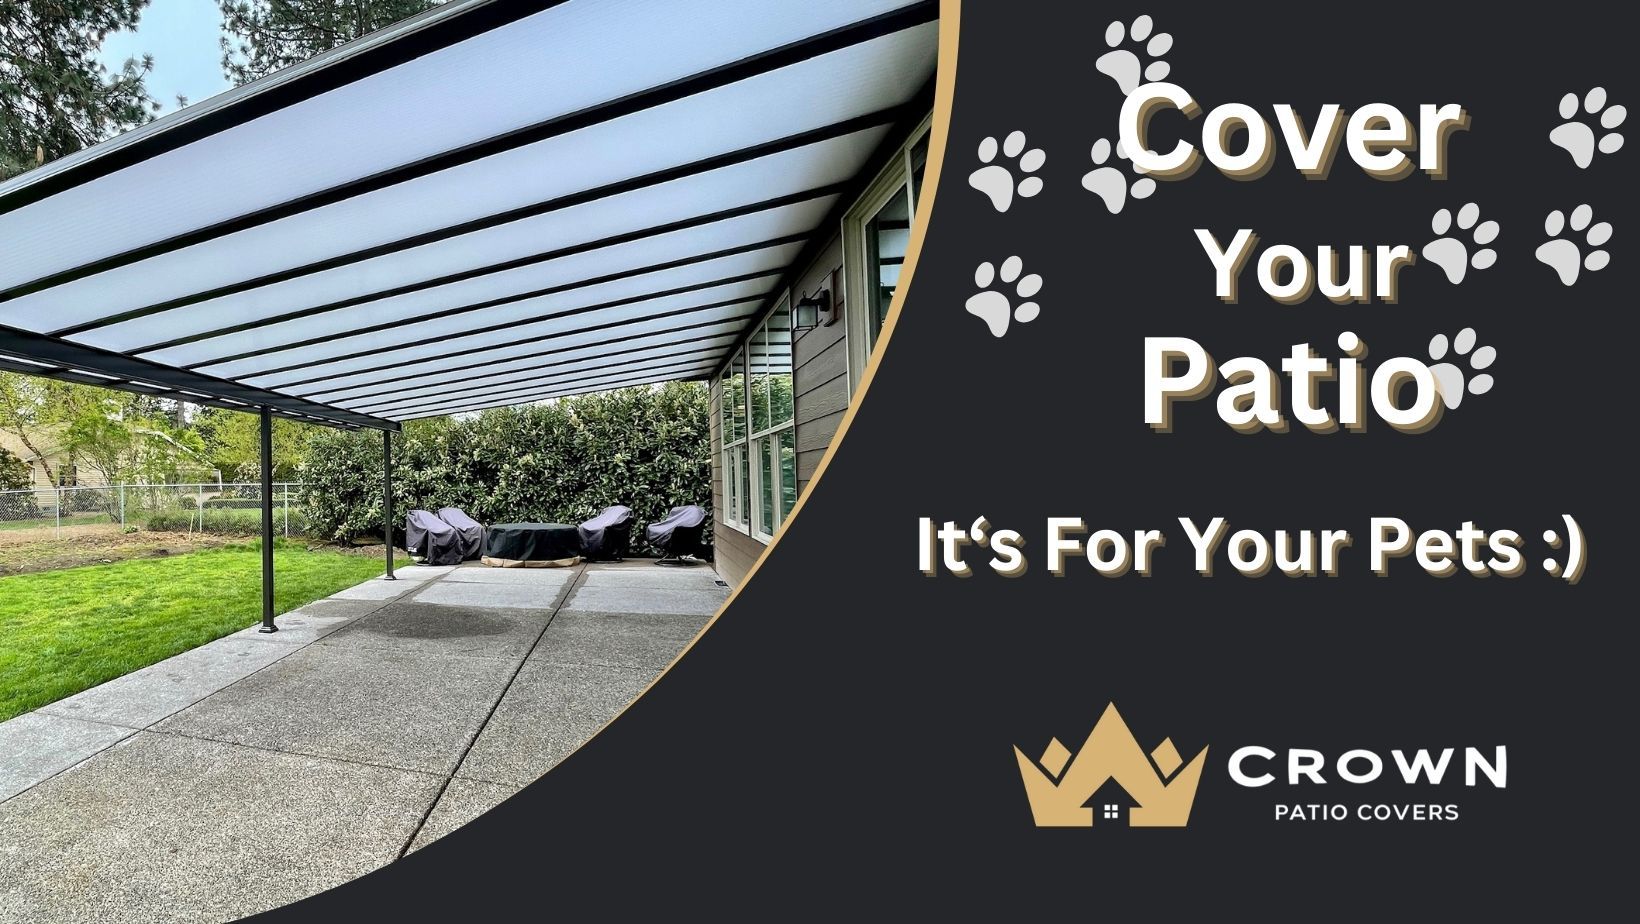 Crown Patio Covers in Portland Oregon helps install covers in  Fall time